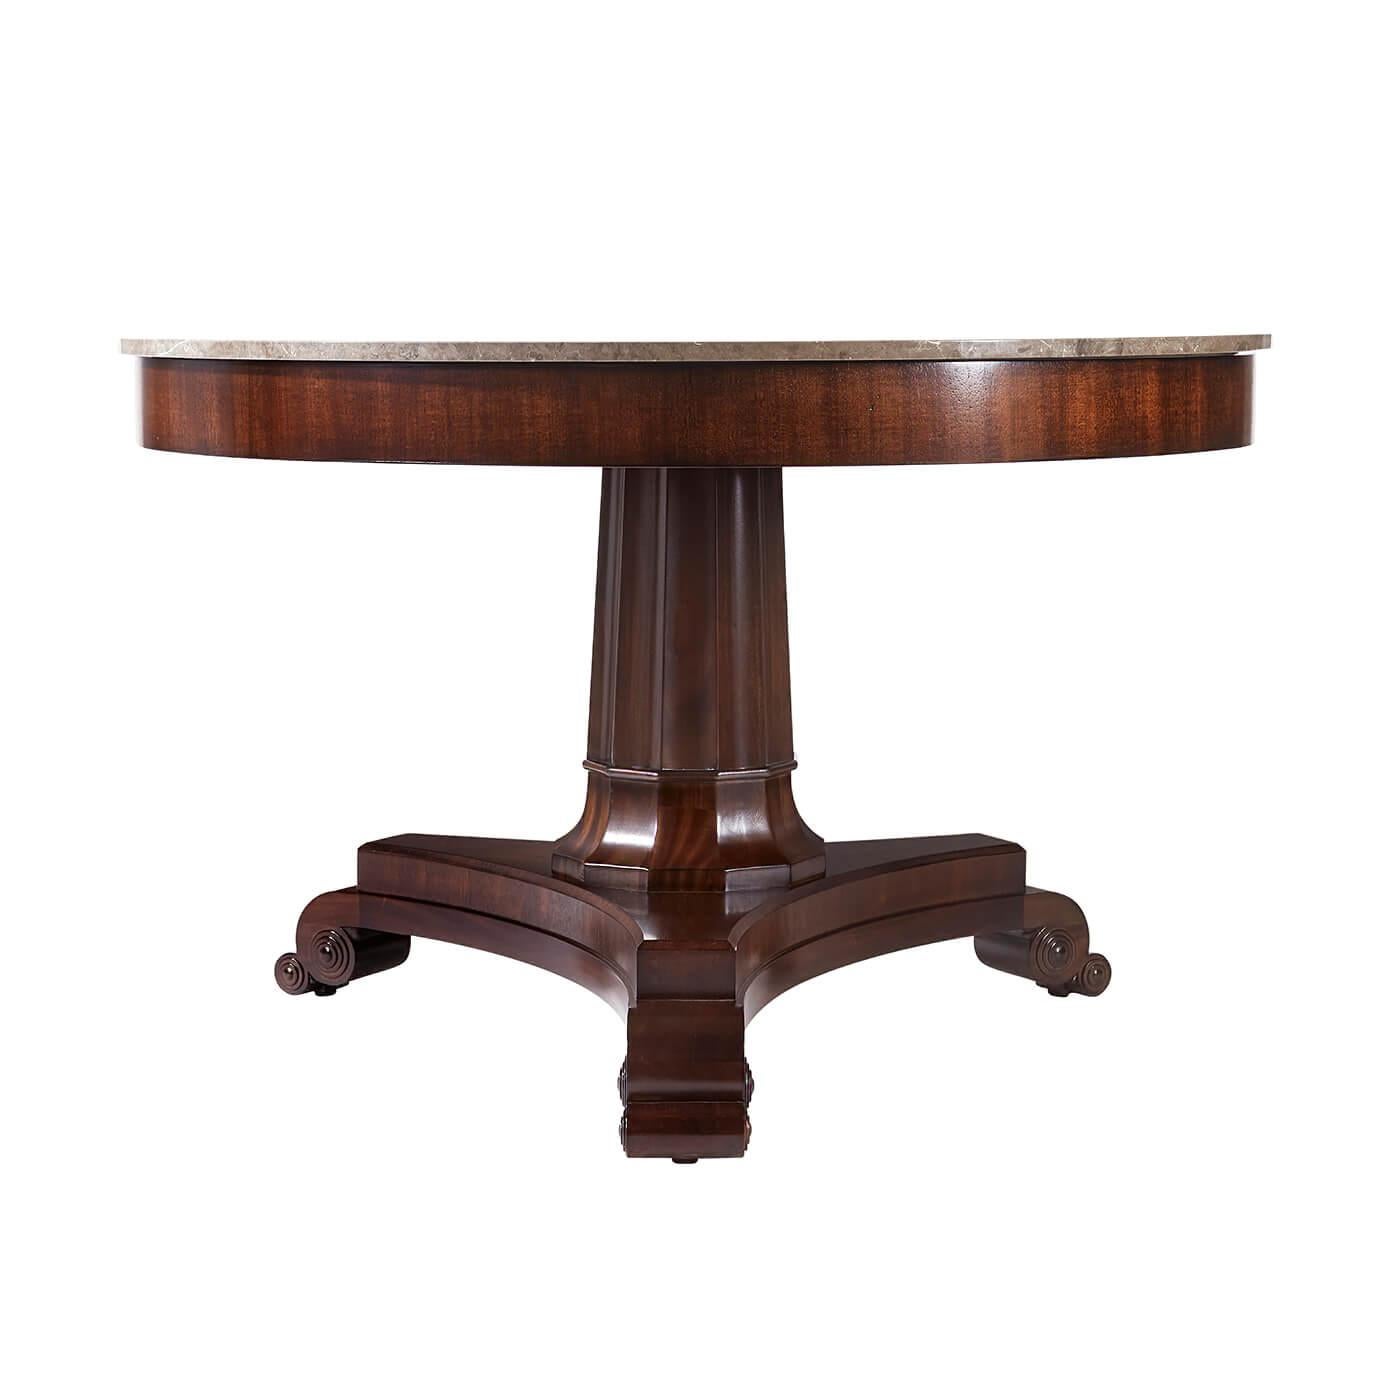 Neoclassical Classical Round Center Table For Sale